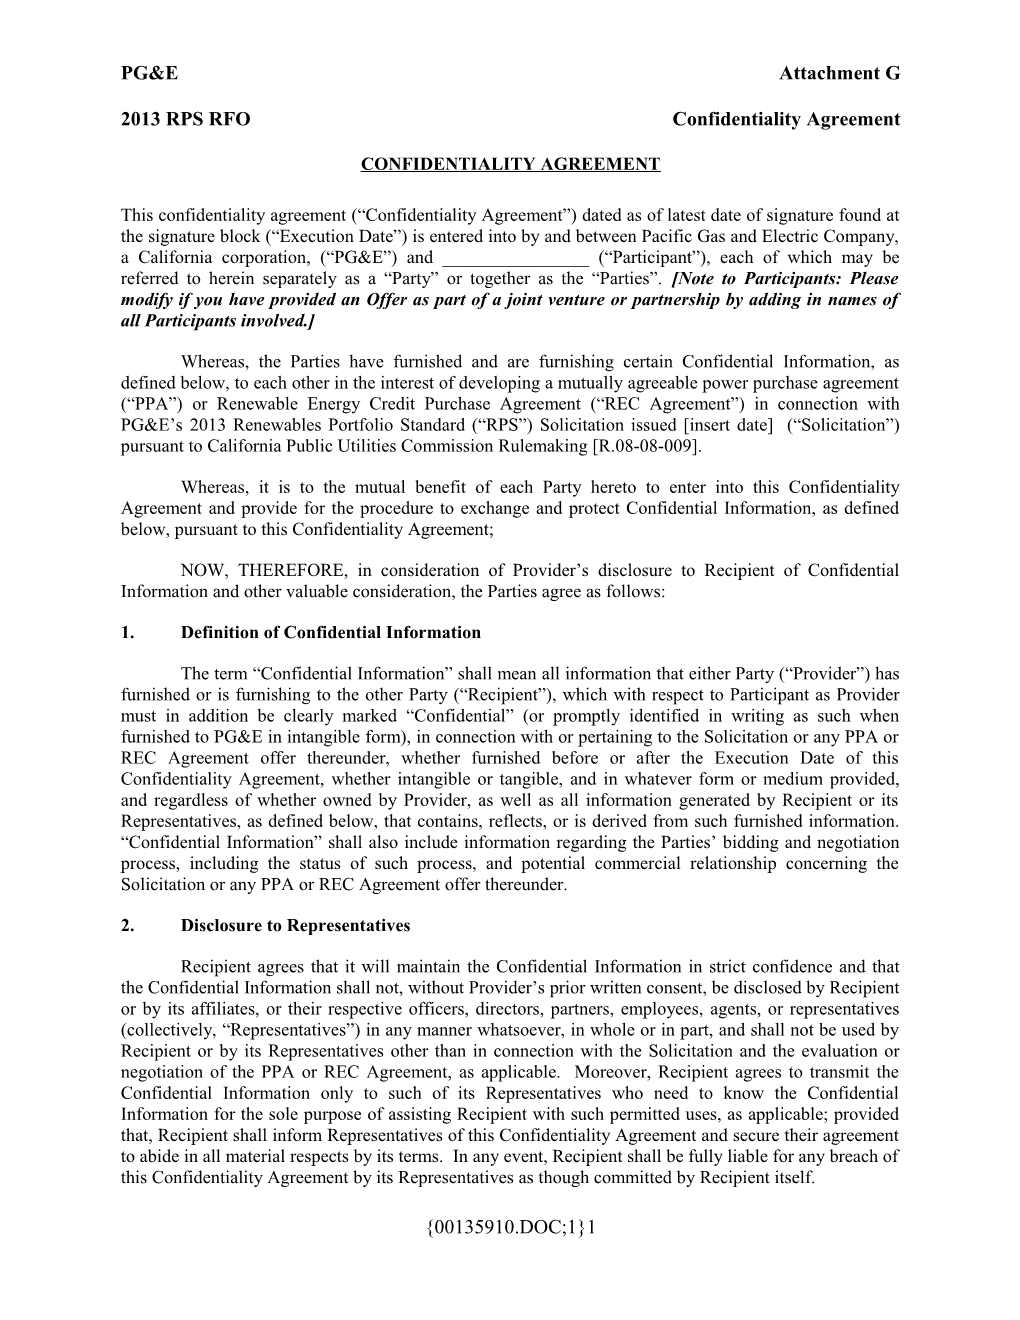 Attachment G Confidentiality Agreement